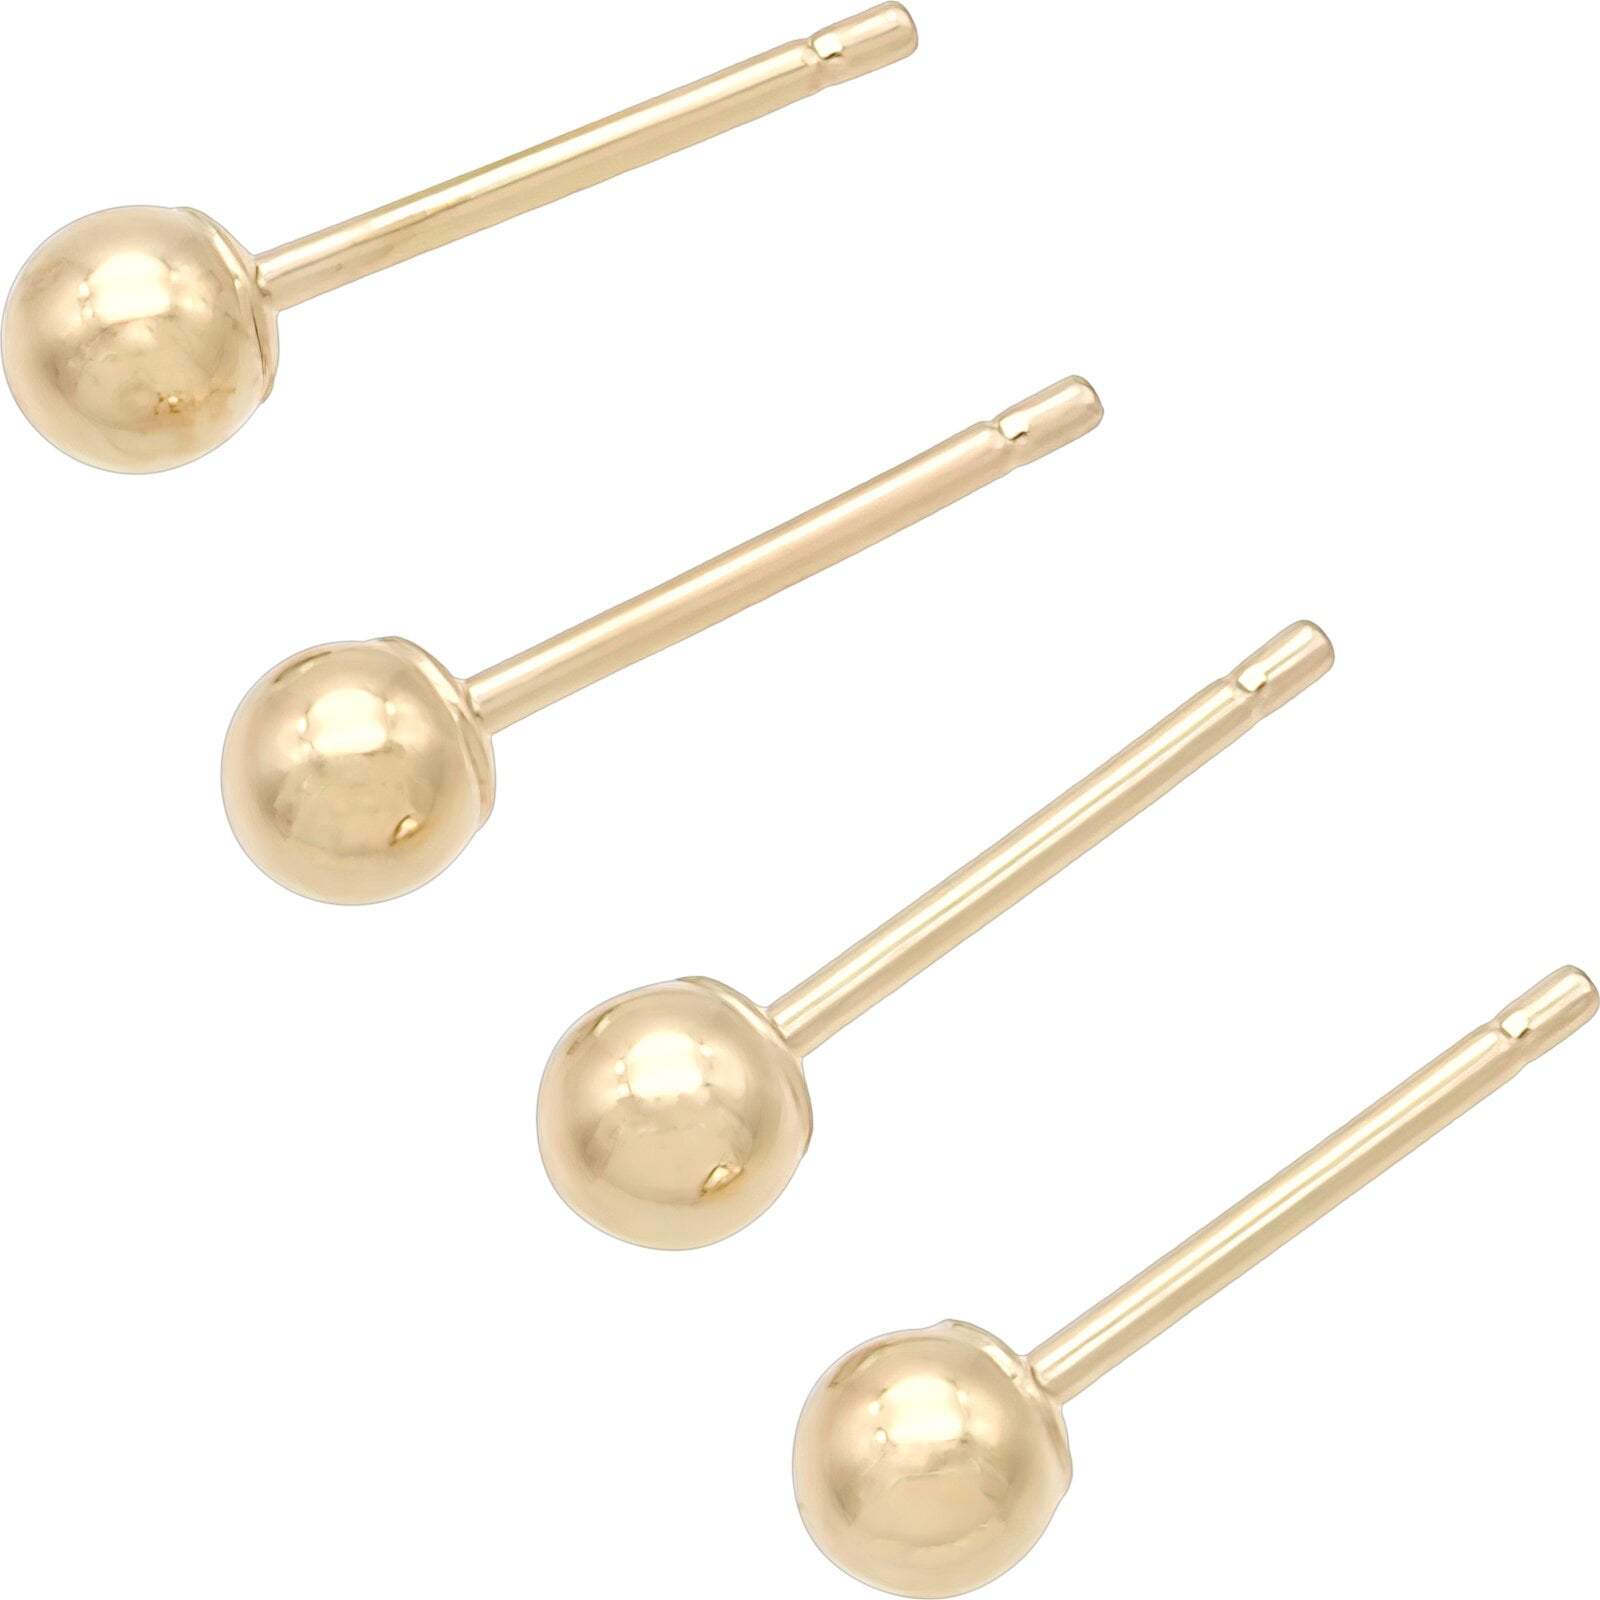 9CT HALLMARKED YELLOW GOLD HIGHLY POLISHED STICK THREAD THROUGH EARRINGS 